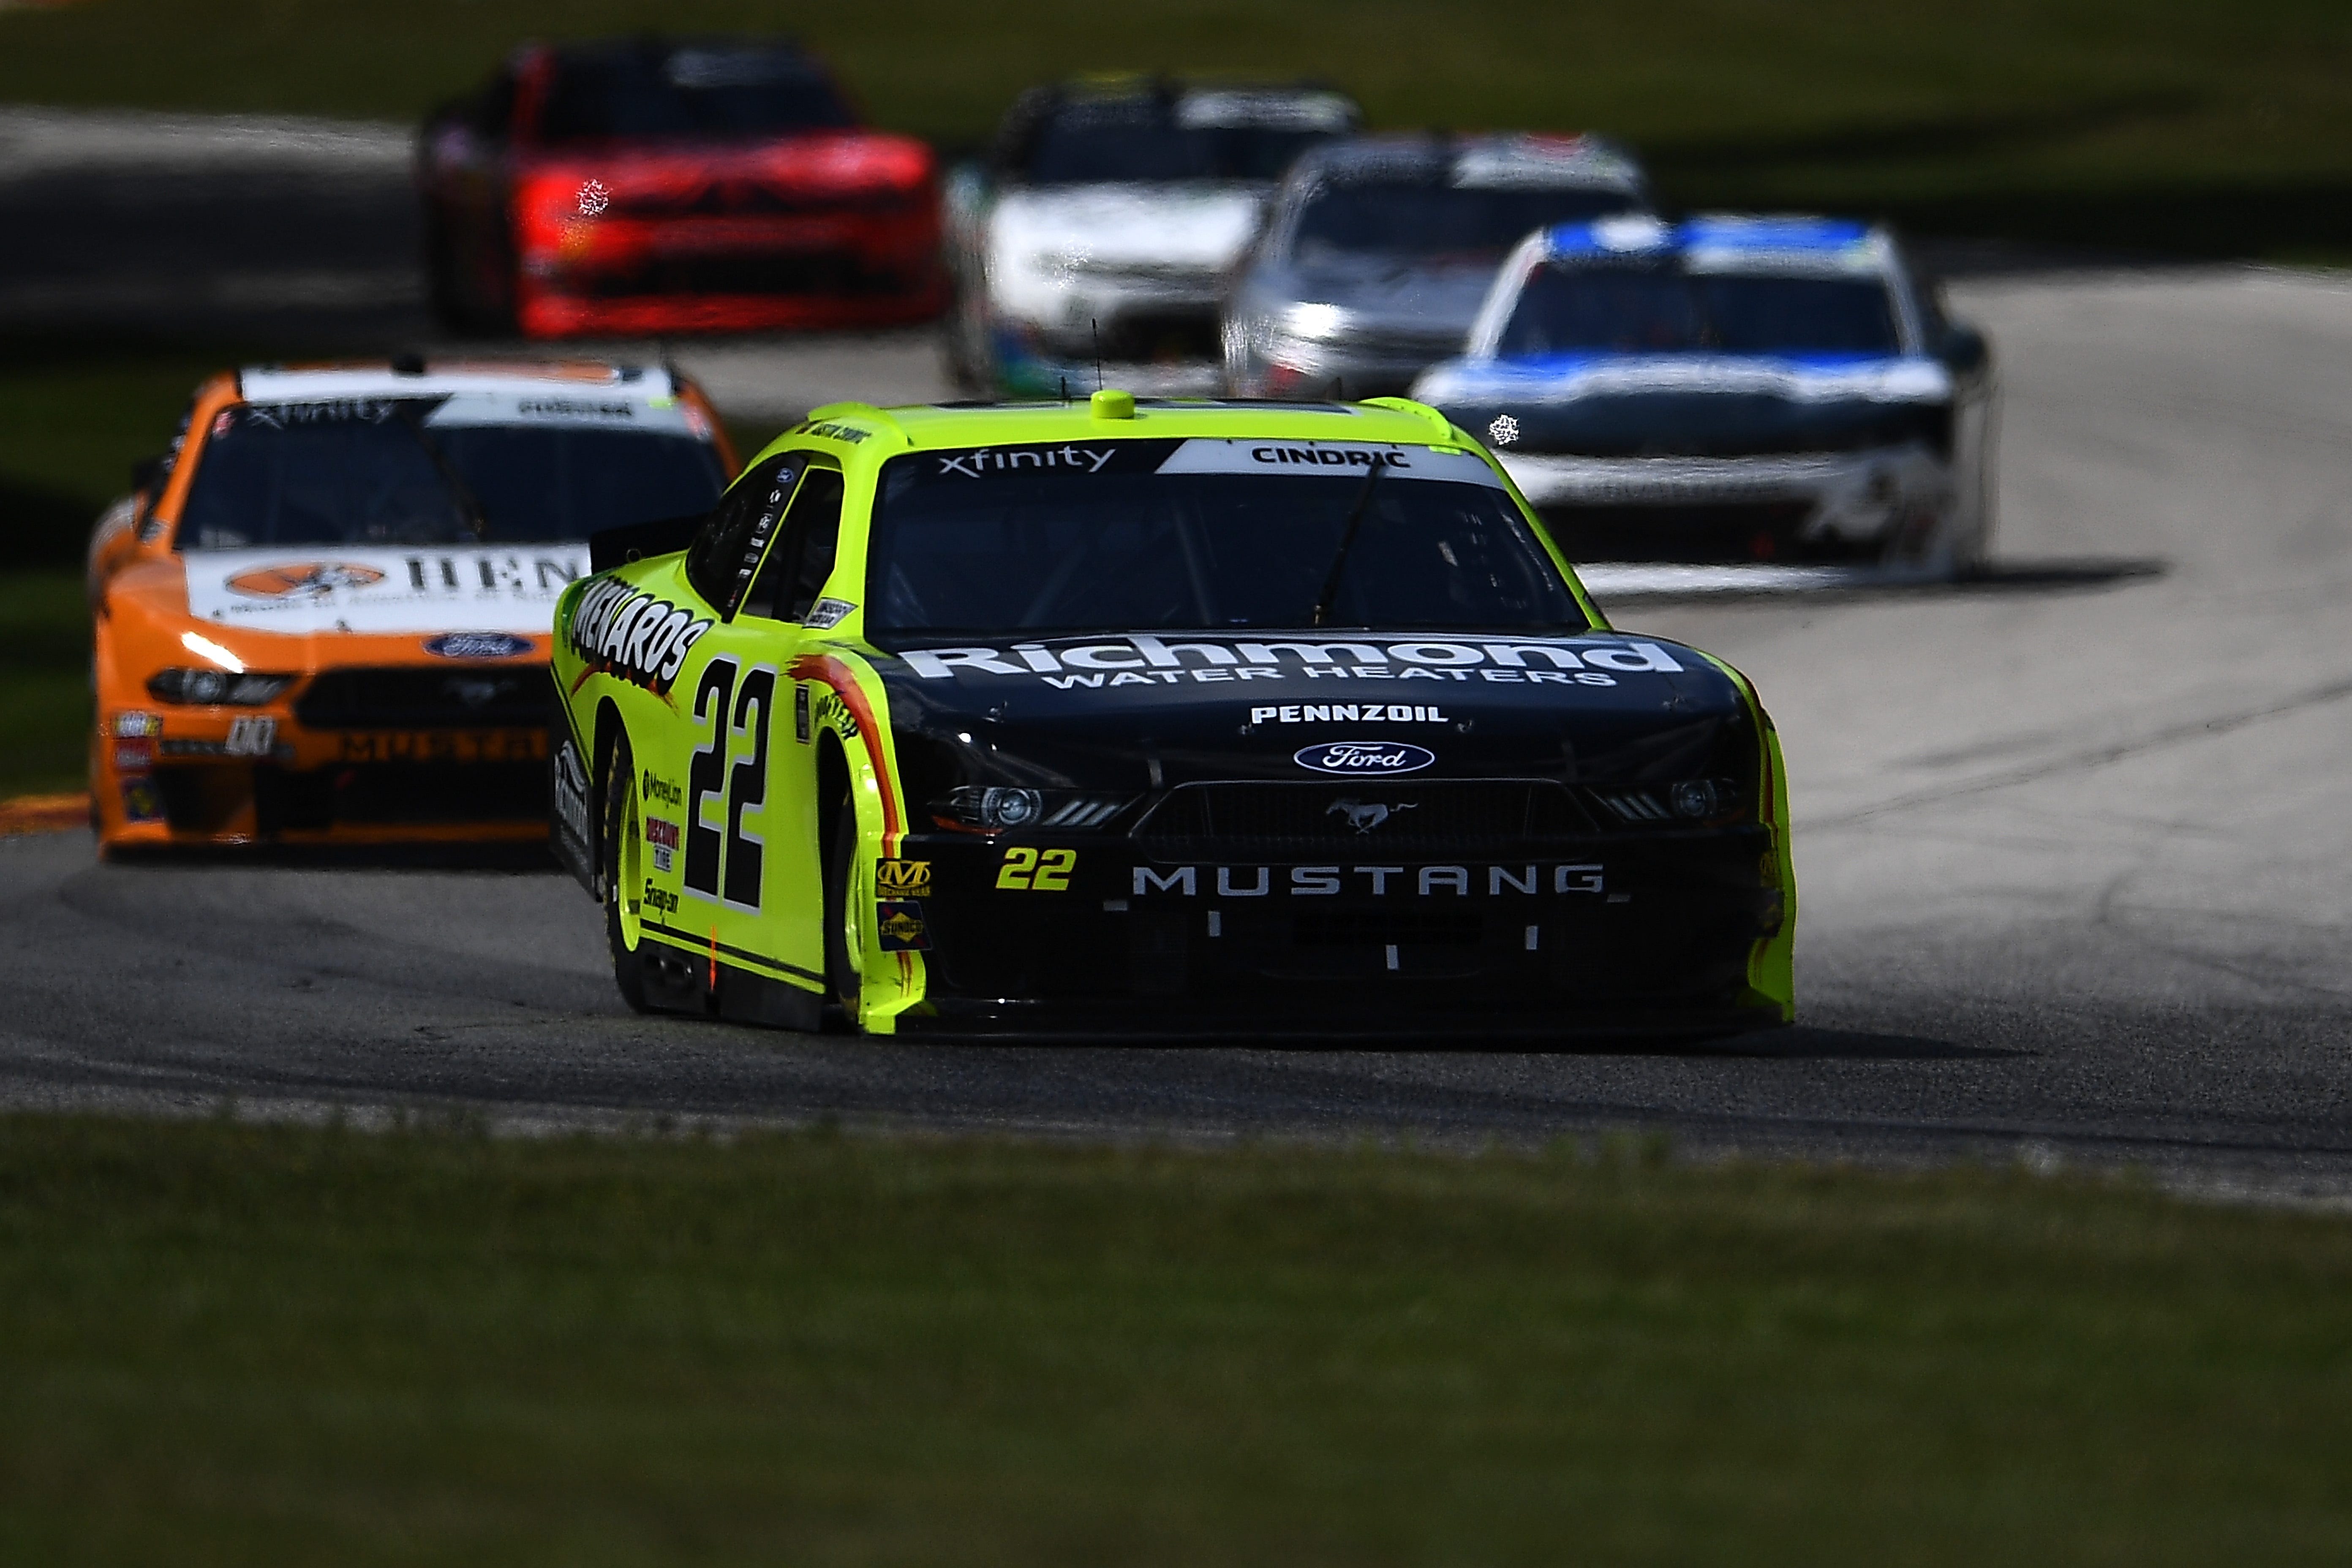 Road America Nascar Race Will Be Run With Experimental Pit Stop Rules